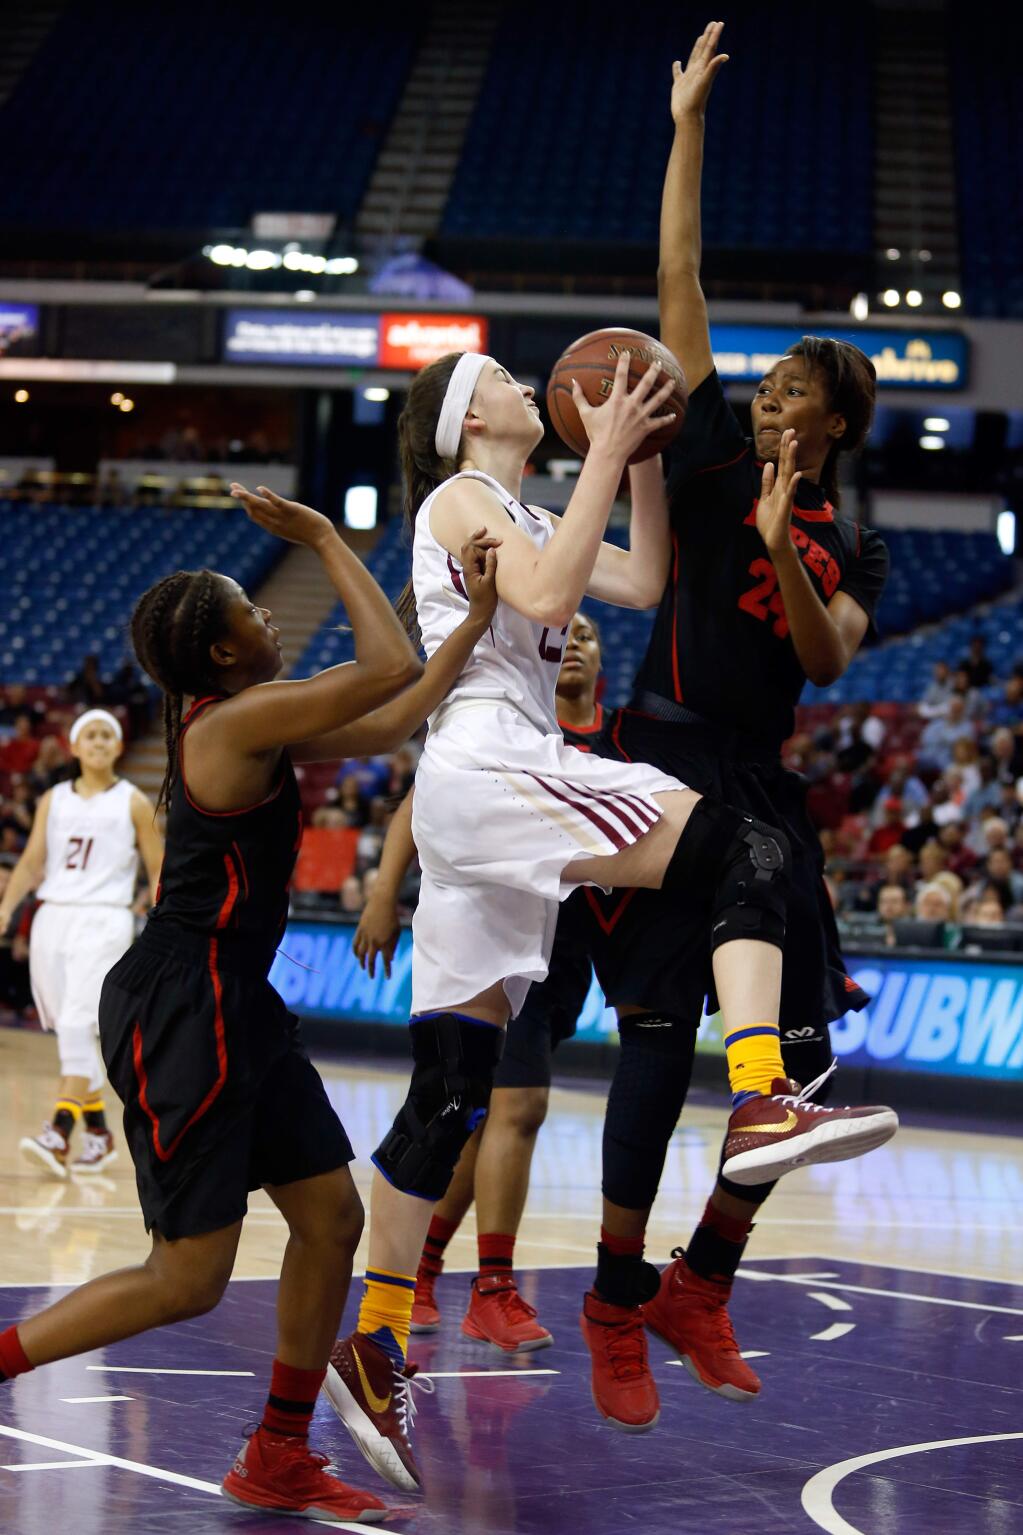 Cardinal Newman's Hailey Vice-Neat (13), center, drives to the basket and gets fouled by Antelope Valley's Oriana Brown (24), right, during the second half of the CIF Division IV girls basketball championship game between Cardinal Newman and Antelope Valley high schools at Sleep Train Arena in Sacramento, California, on Saturday, March 26, 2016. (Alvin Jornada / The Press Democrat)